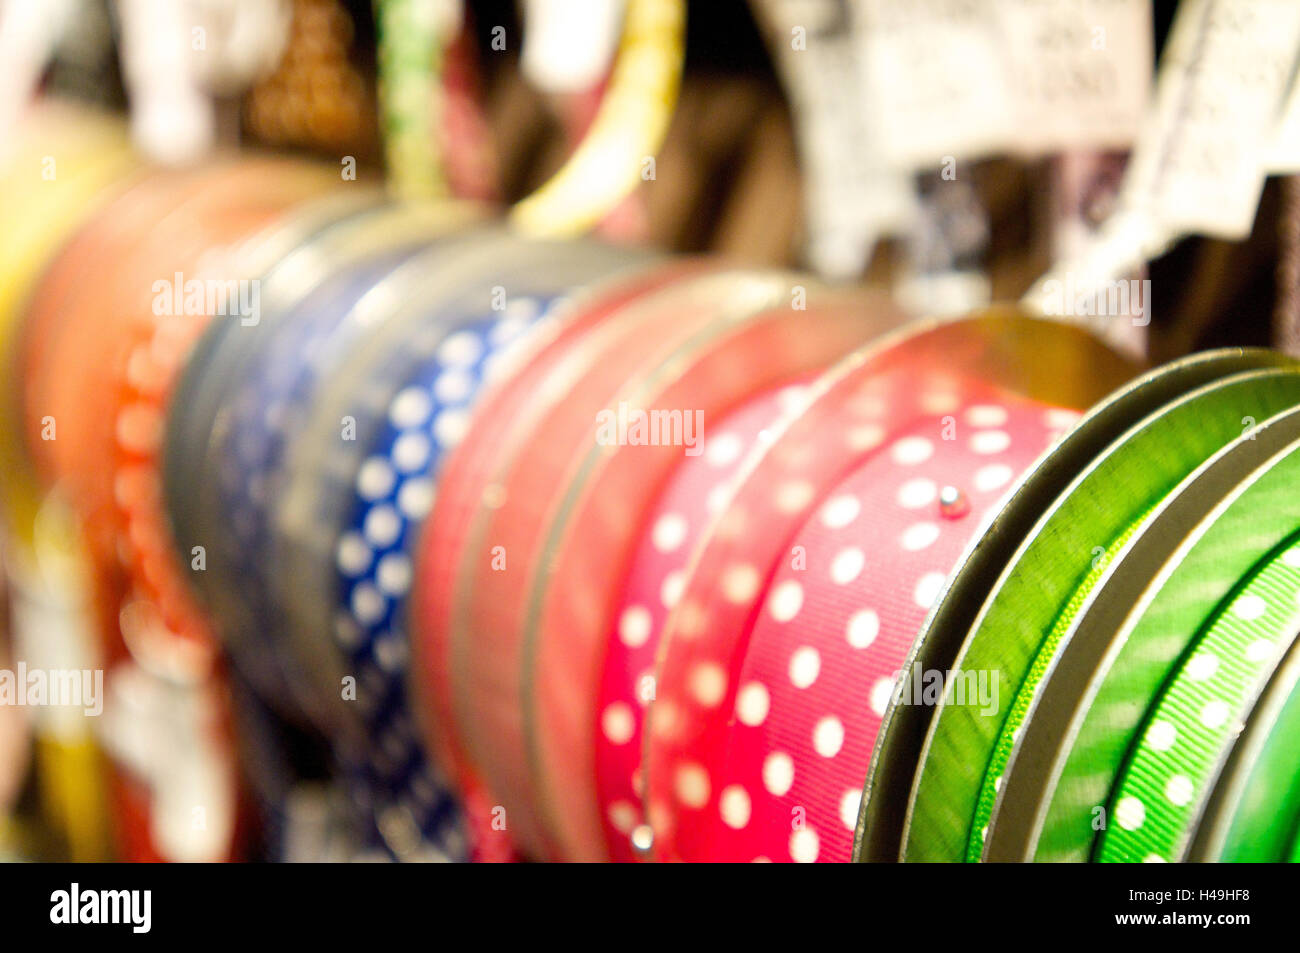 Ribbons and bows on spools, Stock Photo